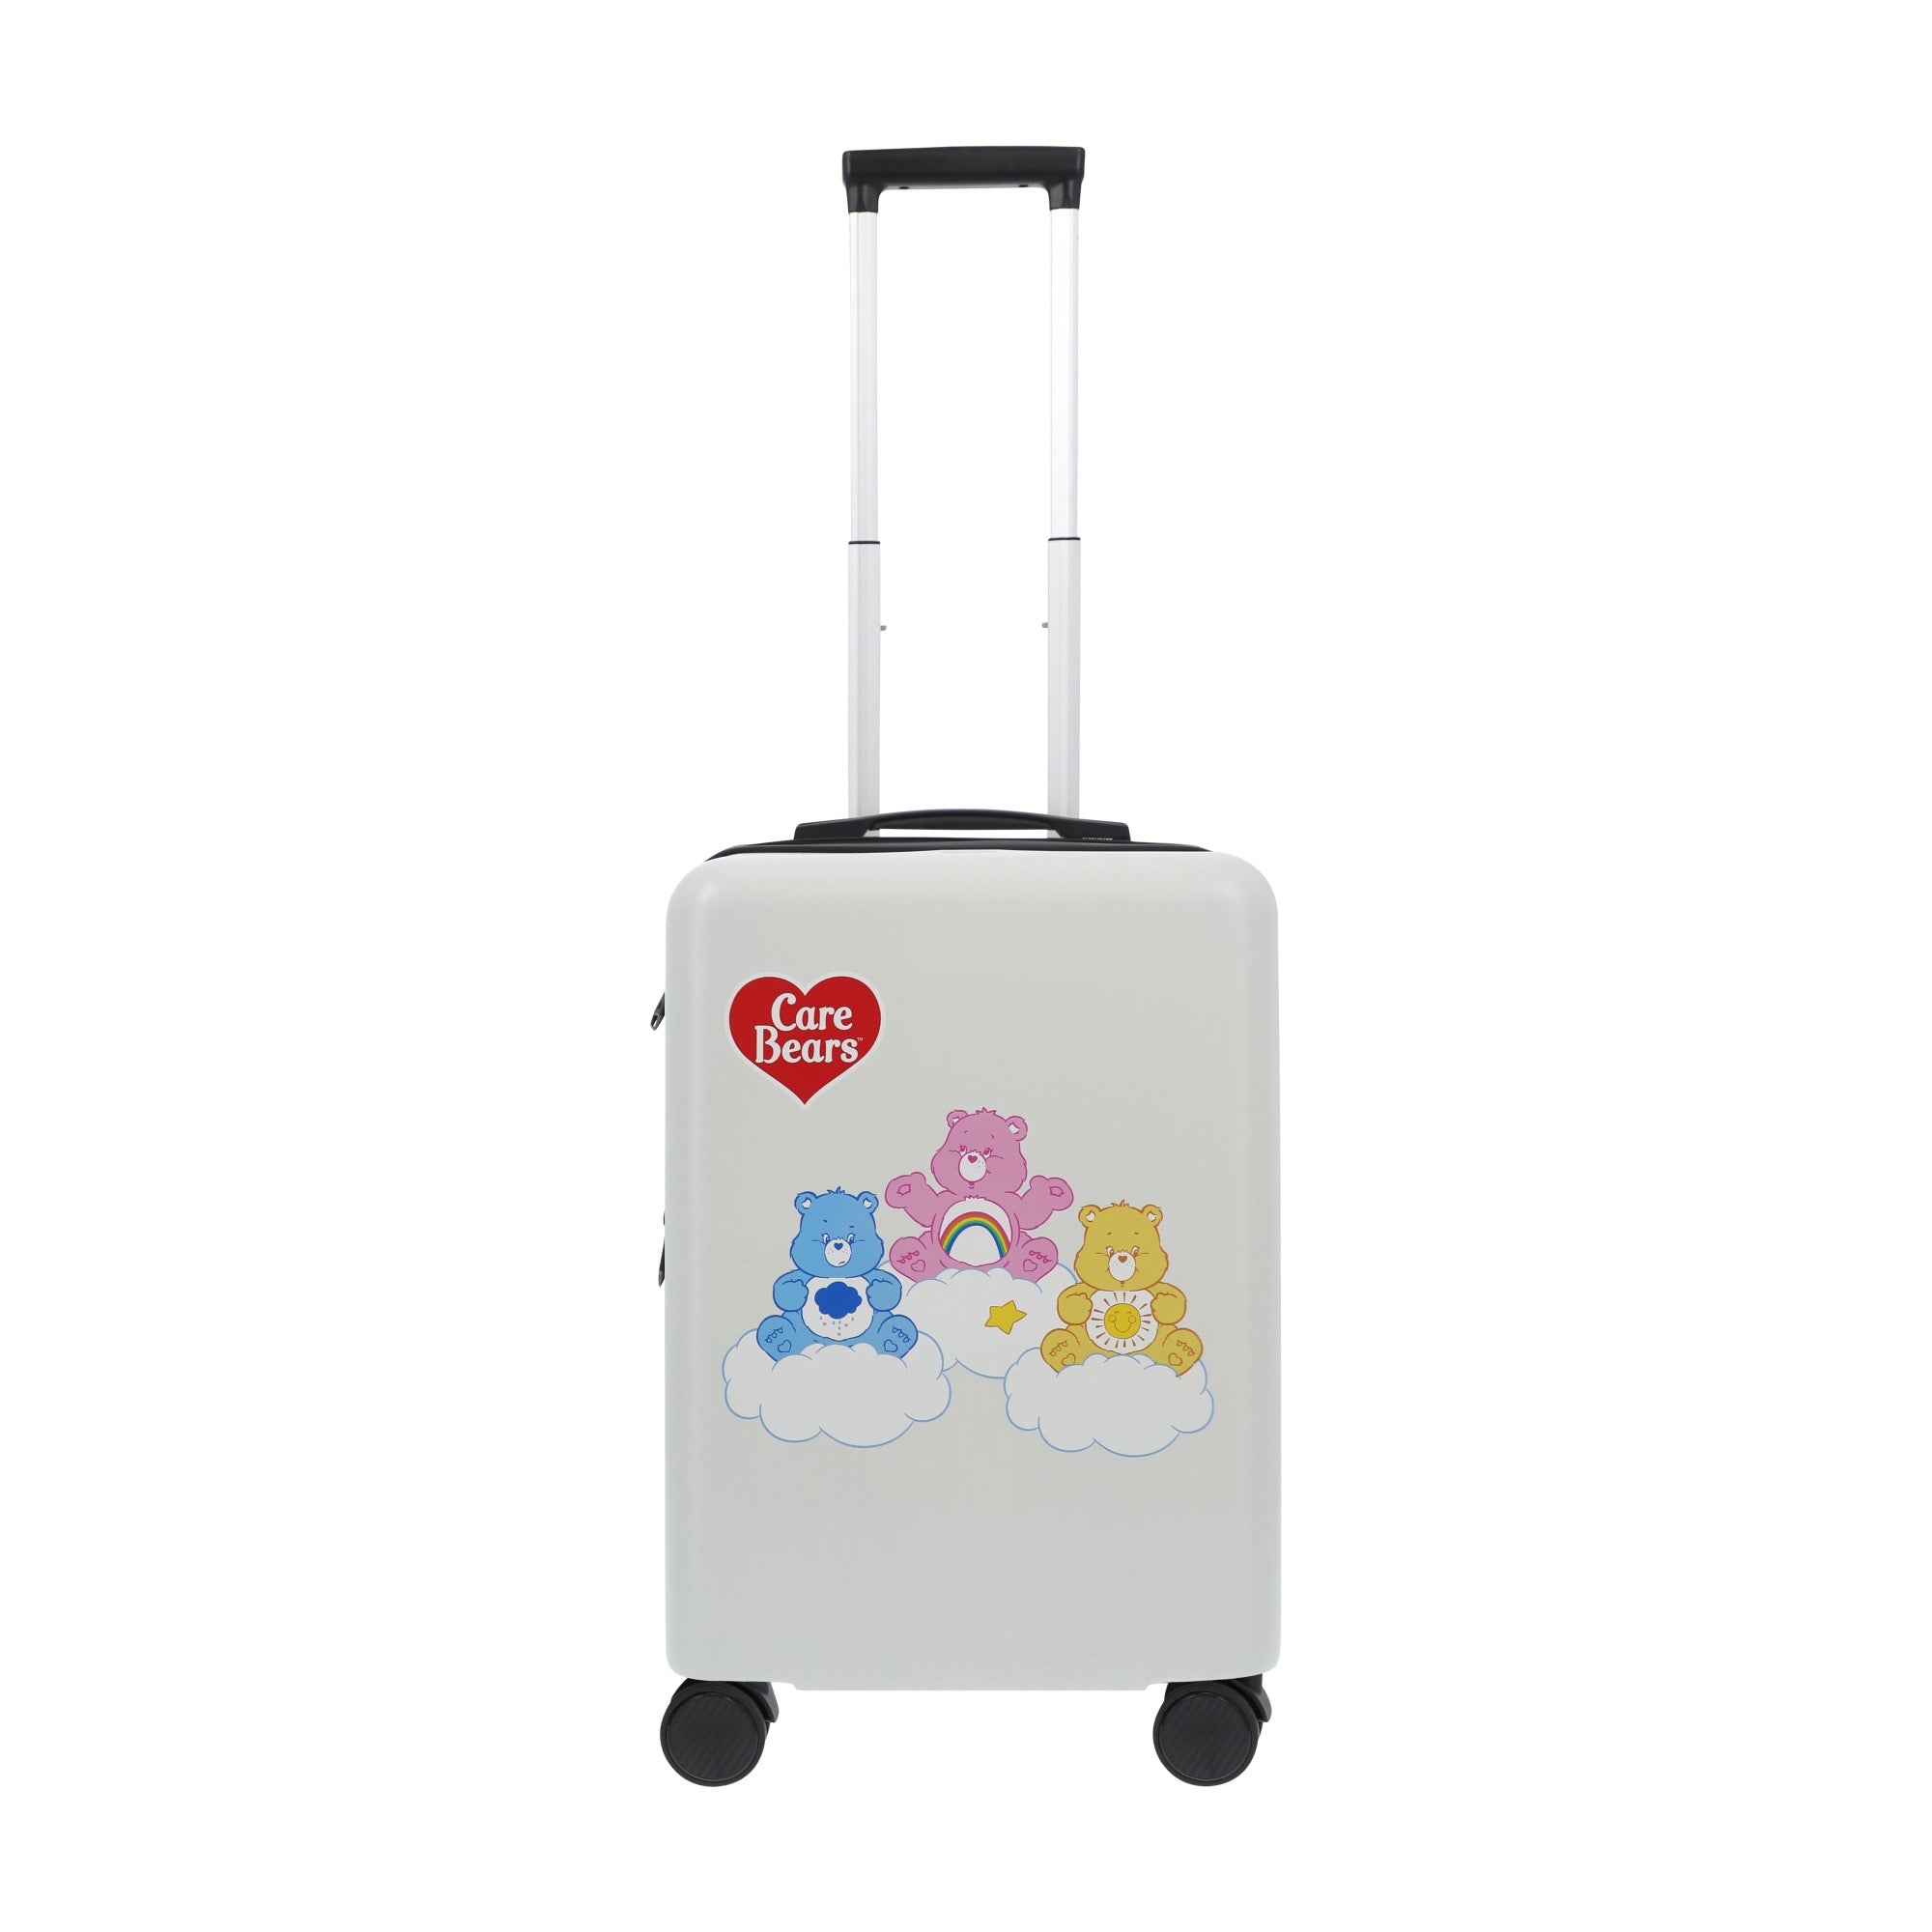 White cloudco care bears 22.5" carry-on spinner suitcase luggage by Ful